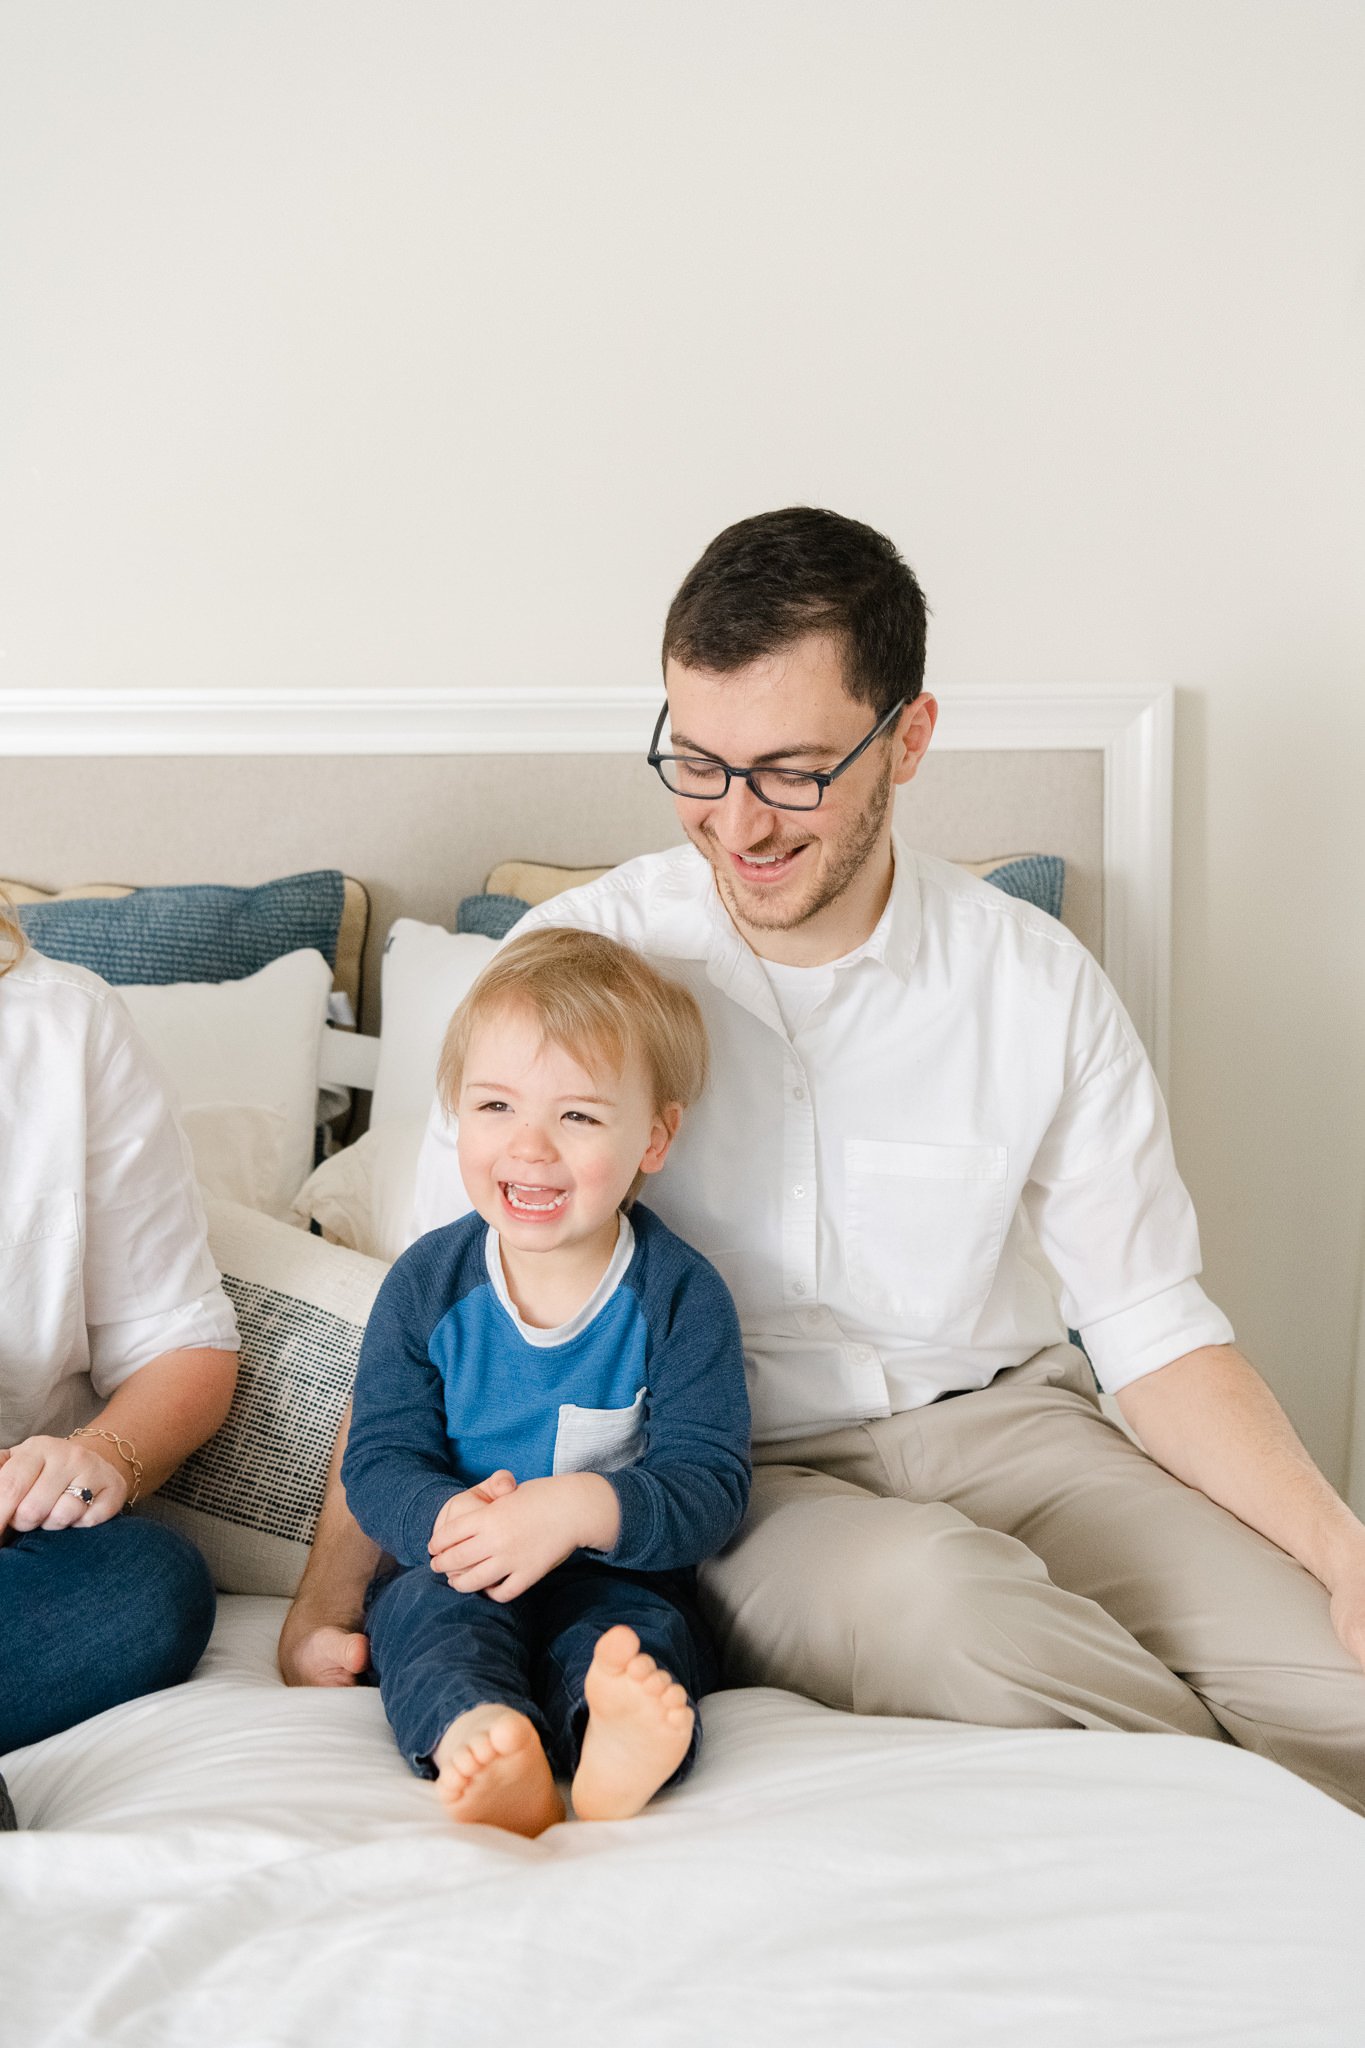  A dad with glasses smiles down at his little toddler boy while sitting on a bed by Nicole Hawkins Photography. toddler boy and dad sitting on bed #NicoleHawkinsPhotography #NicoleHawkinsfamilies #AtHomePortraits #EastCoastFamilyPhotographer #NewJers